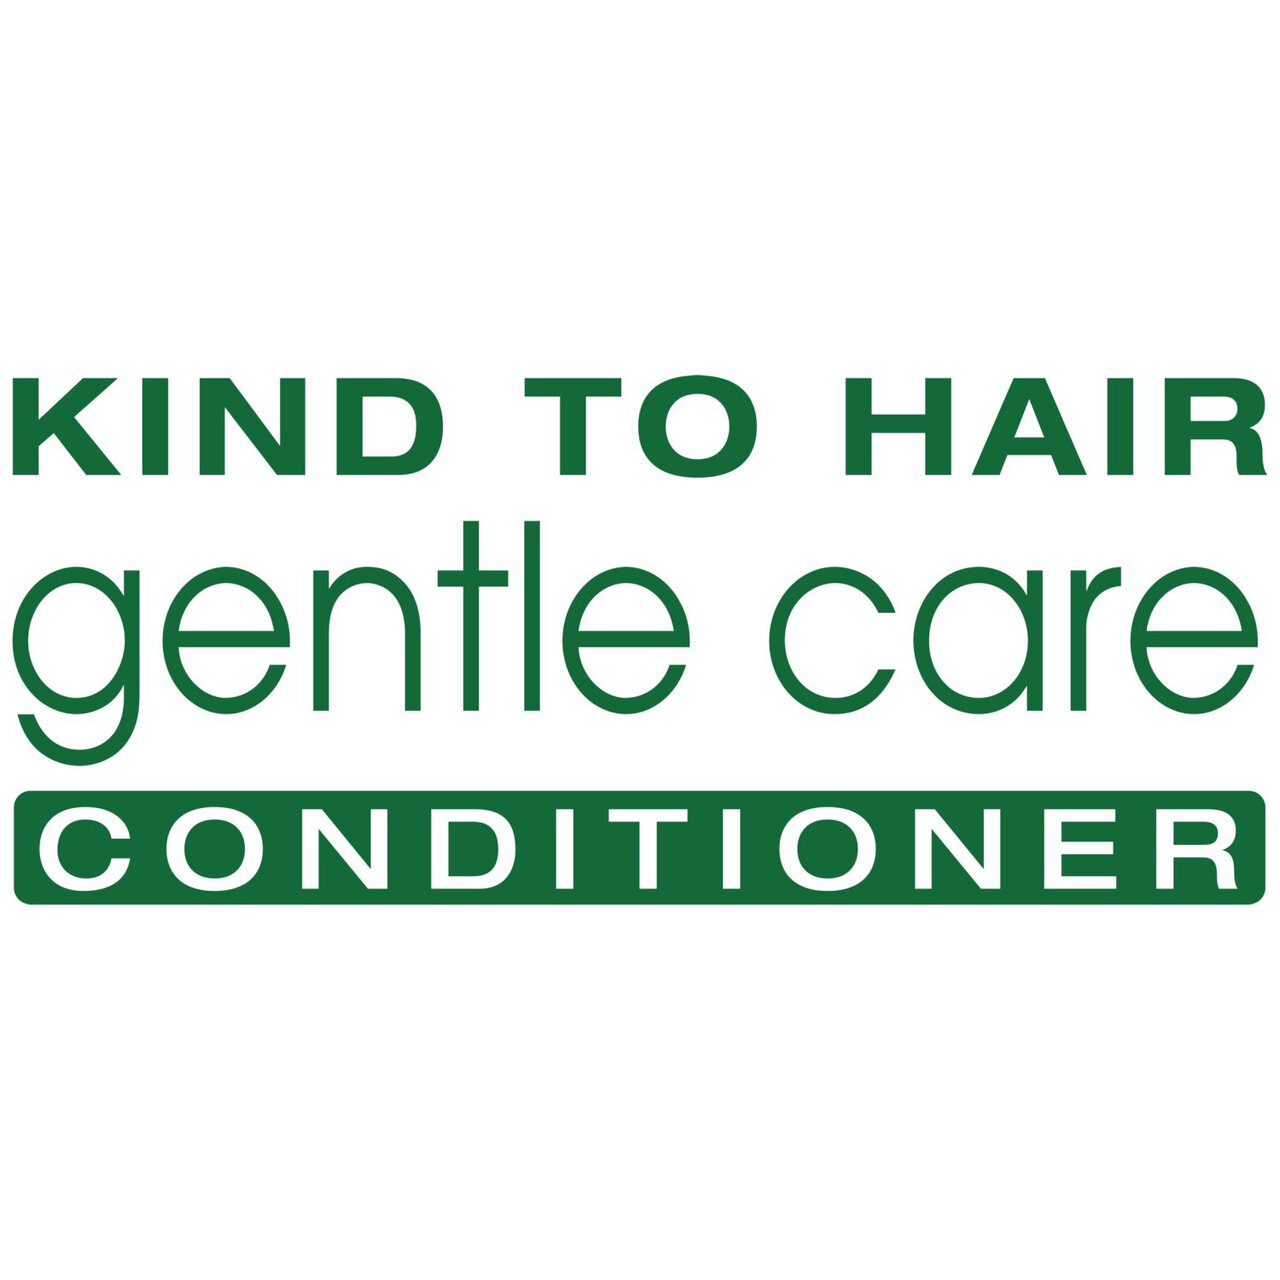 Simple Kind to Hair Gentle Care Conditioner 200ml